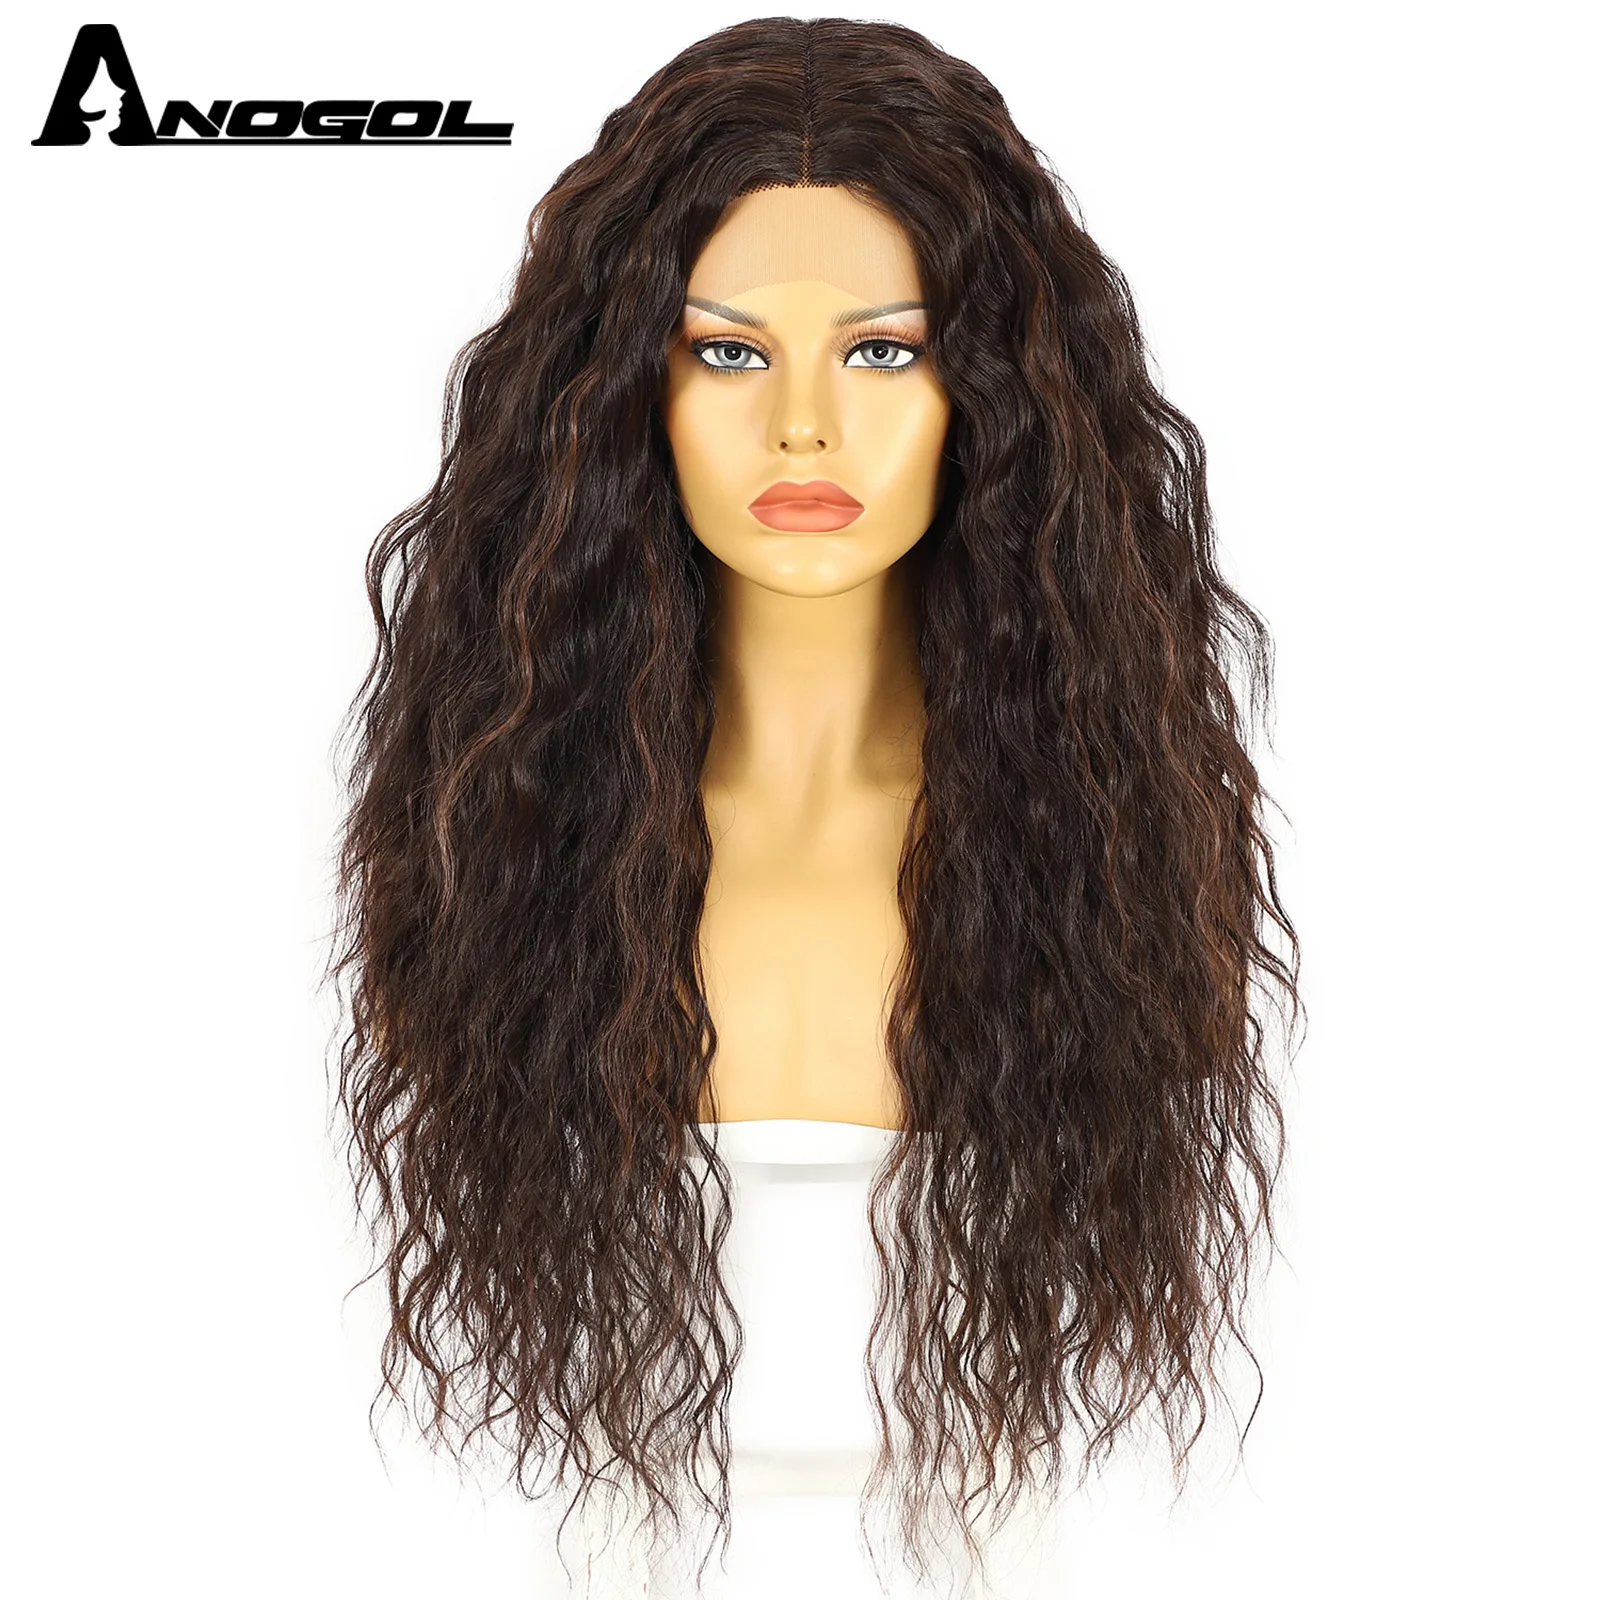 ANOGOL Synthetic Wigs 28IN TPart Lace Hightlighting Brown Water Wave Middle Part Hair PrePlucked Black Kink Curly Wig For Women